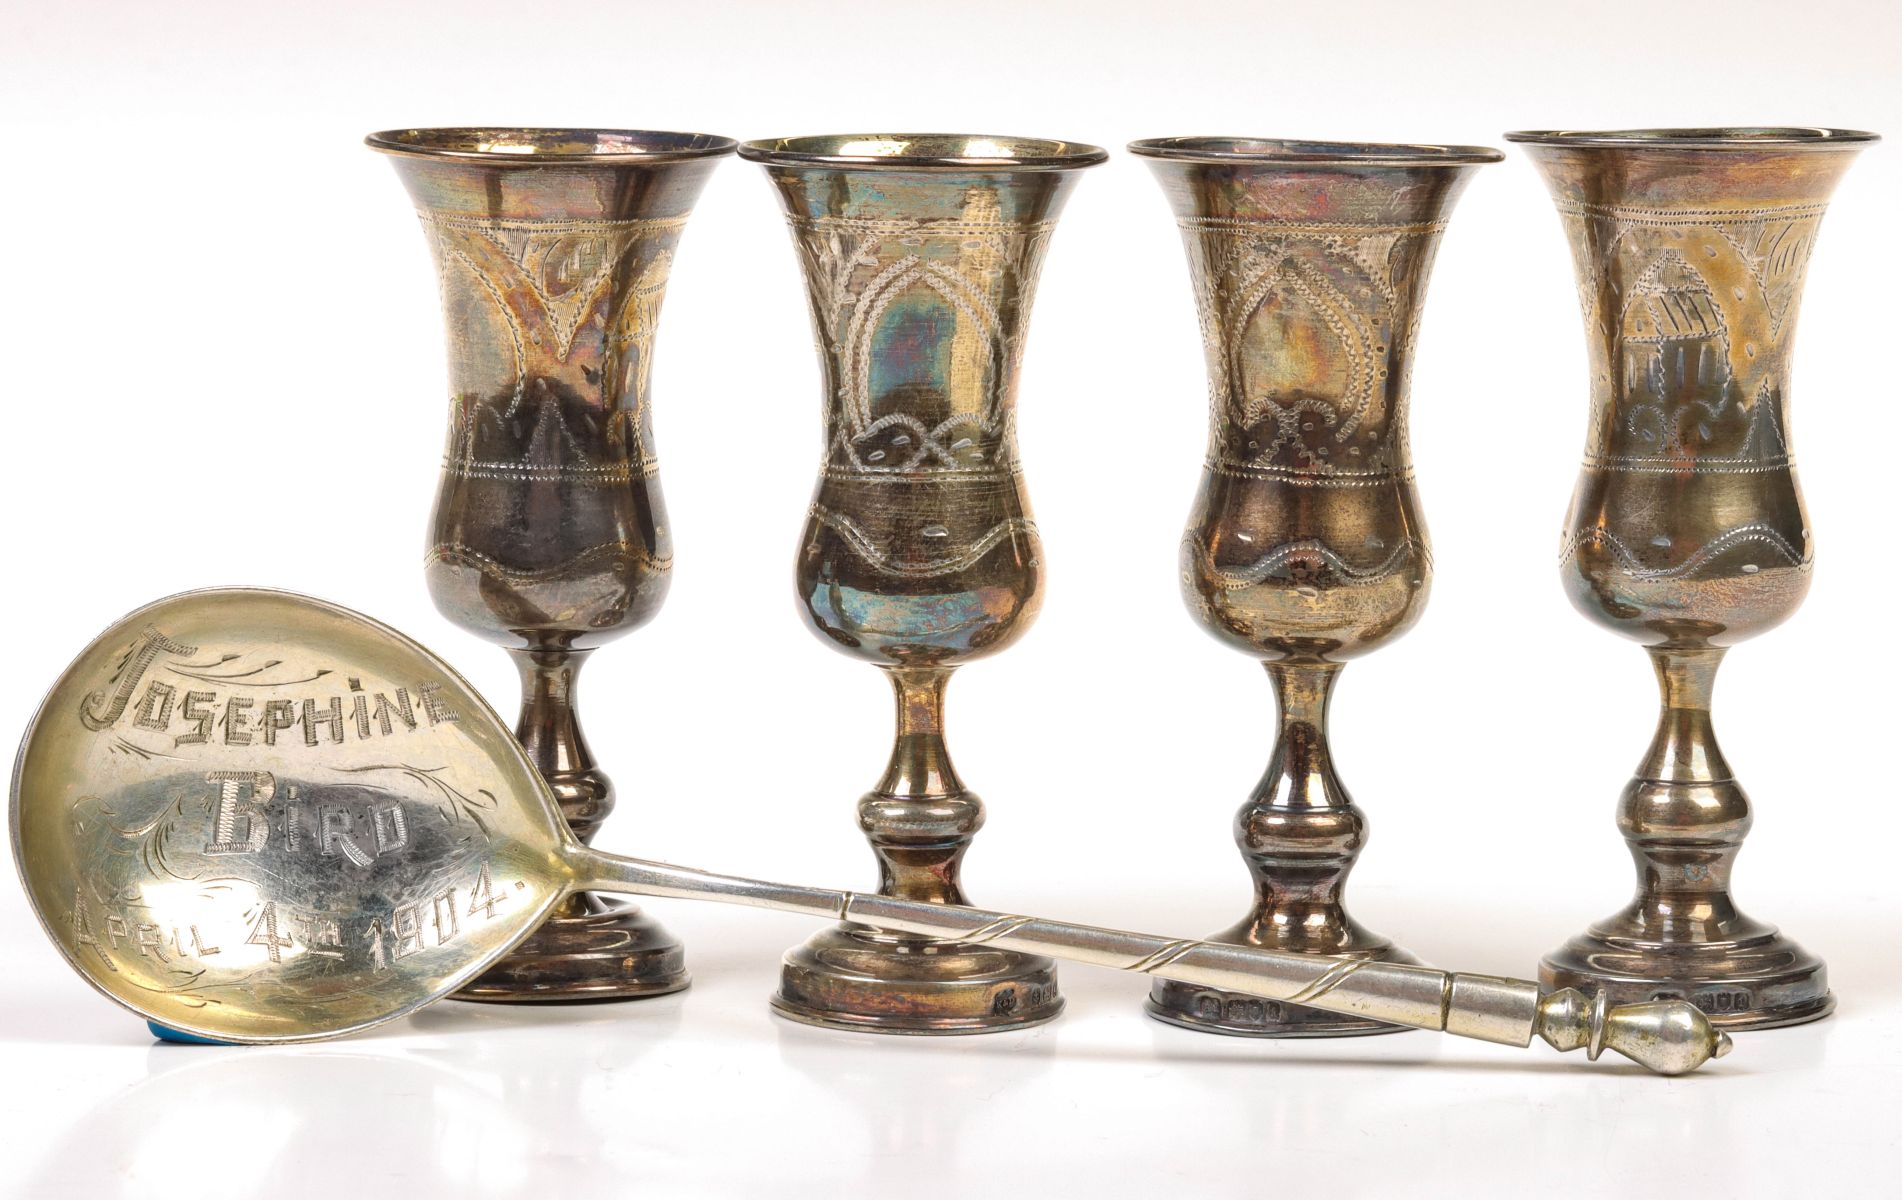 LONDON STERLING SILVER KIDDUSH CUPS AND A RUSSIAN SPOON